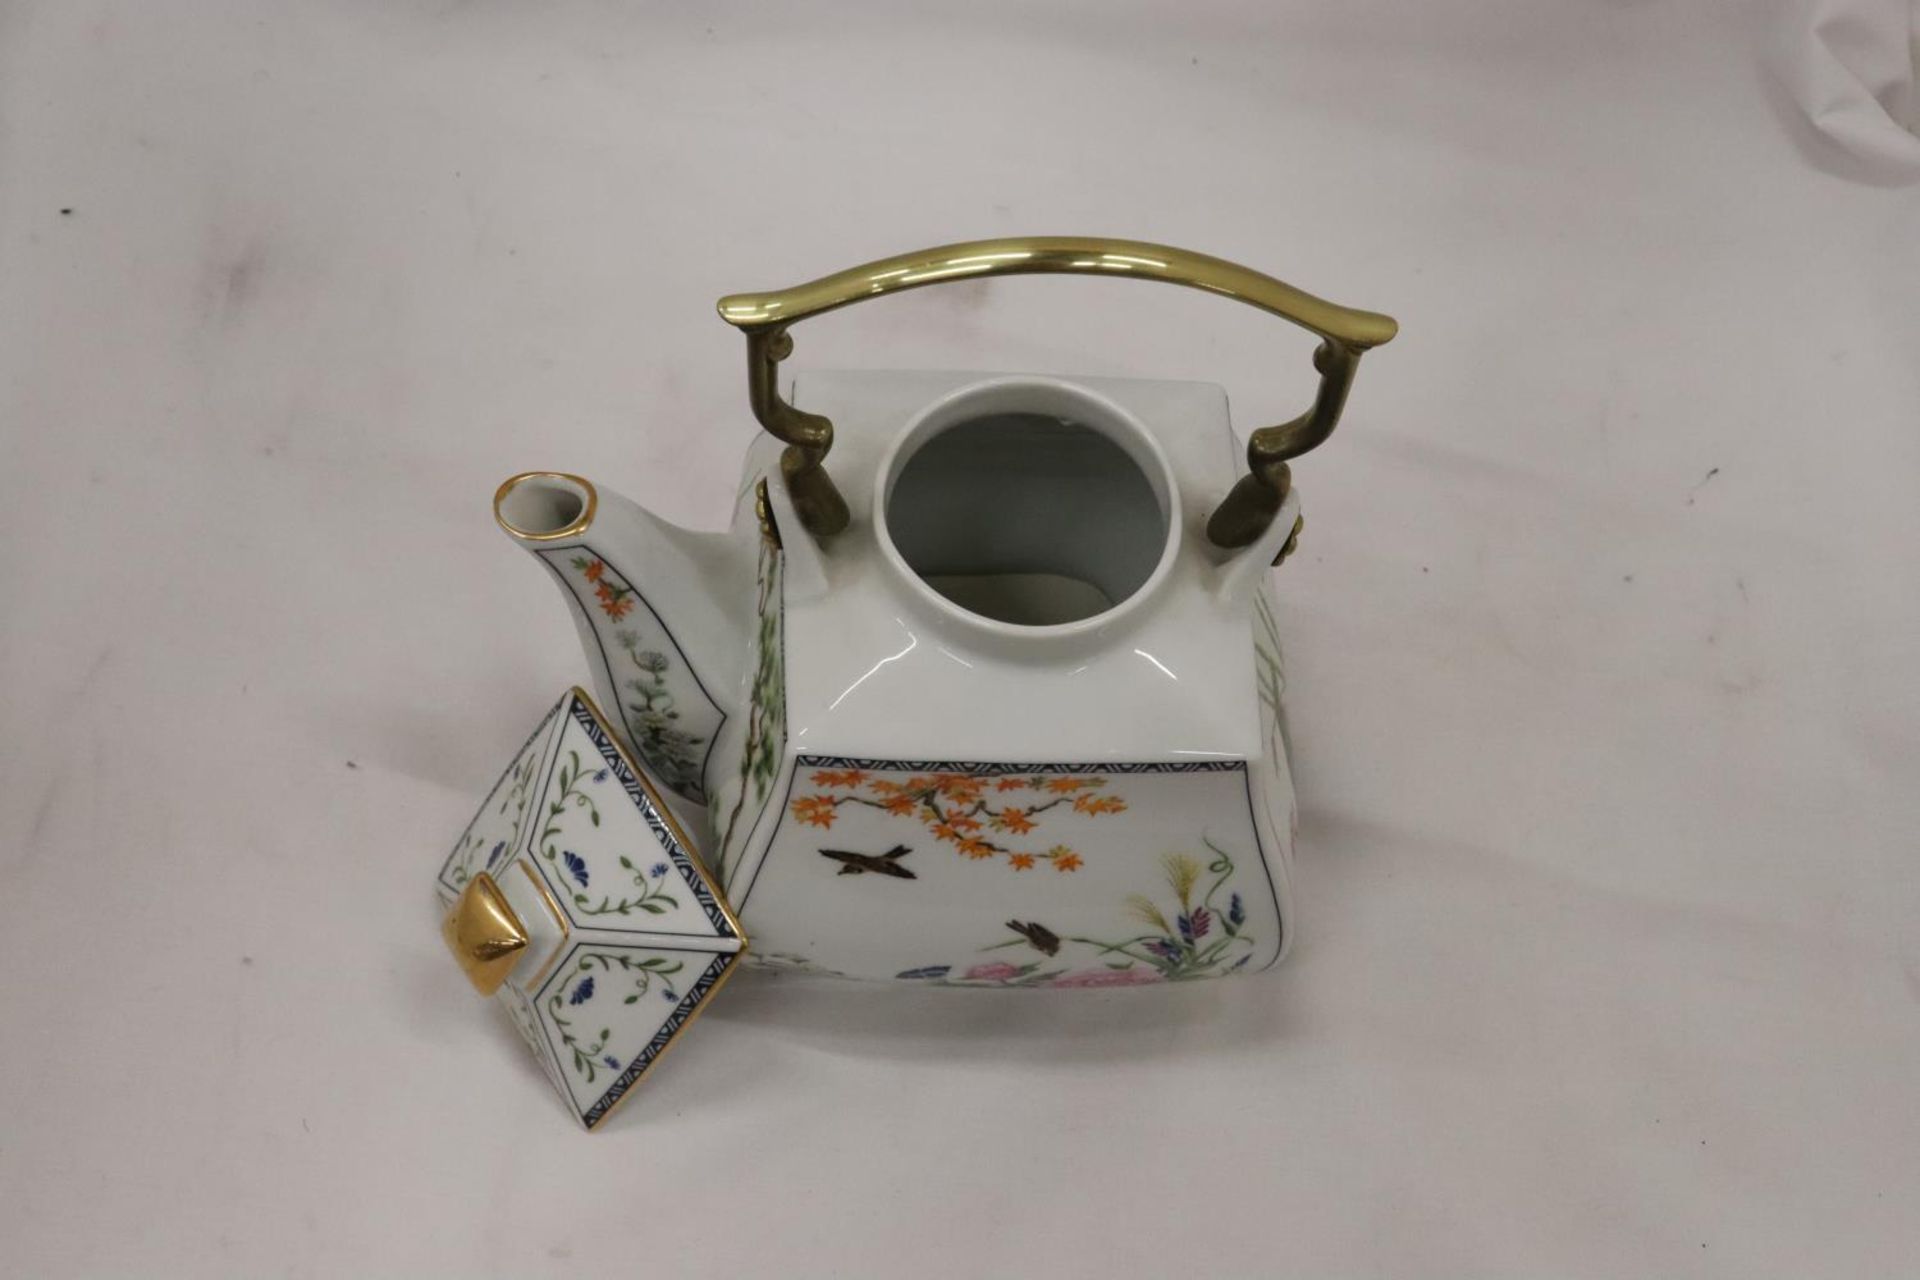 A FRANKLIN PORCELAIN 'THE BIRDS AND FLOWERS OF THE ORIENT' TEAPOT BY NAOKO NOBATA WITH 22CT GOLD - Image 6 of 7